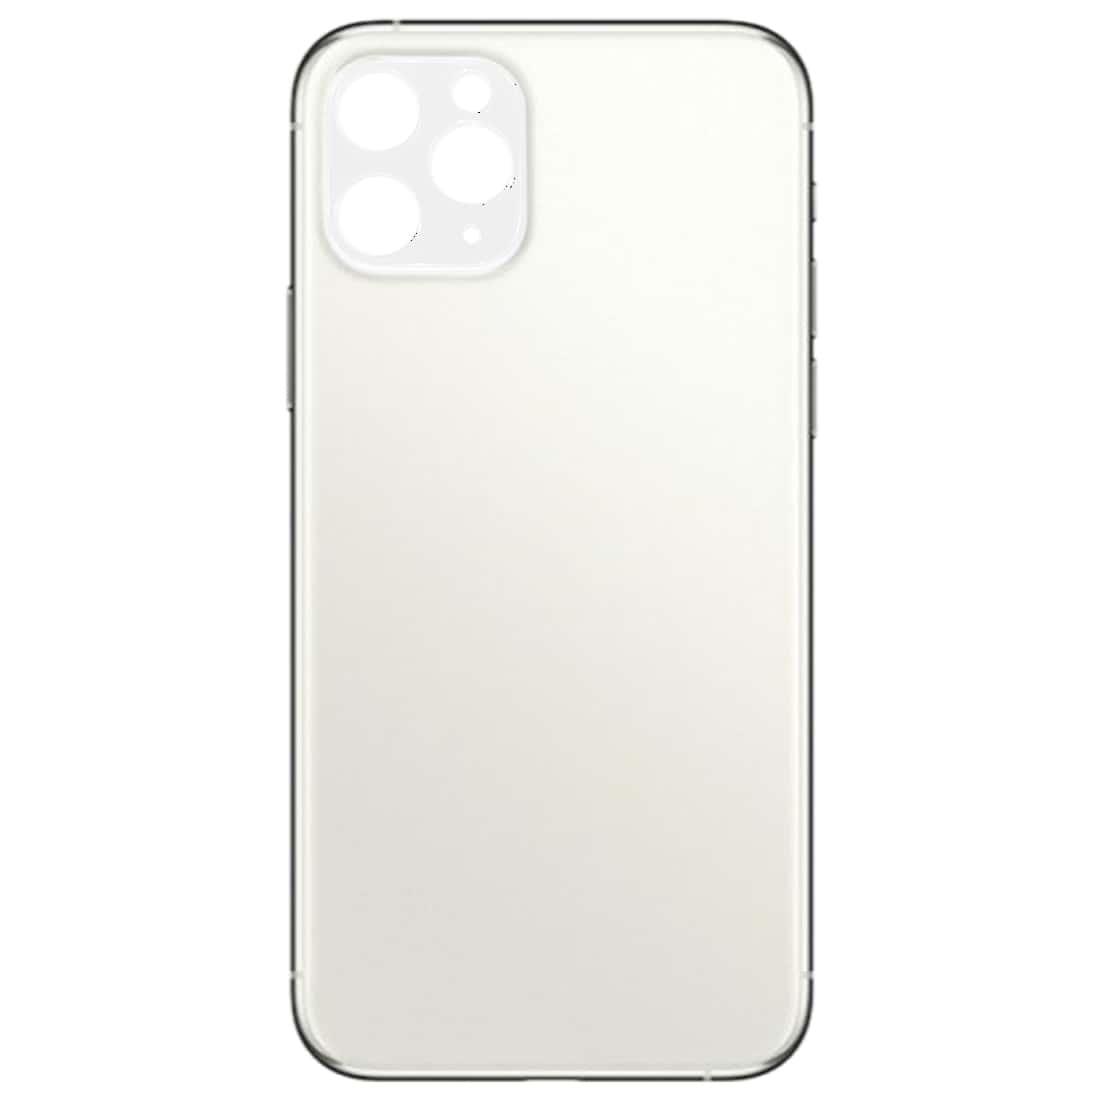 Back Glass Panel for  iPhone 11 Pro Max White